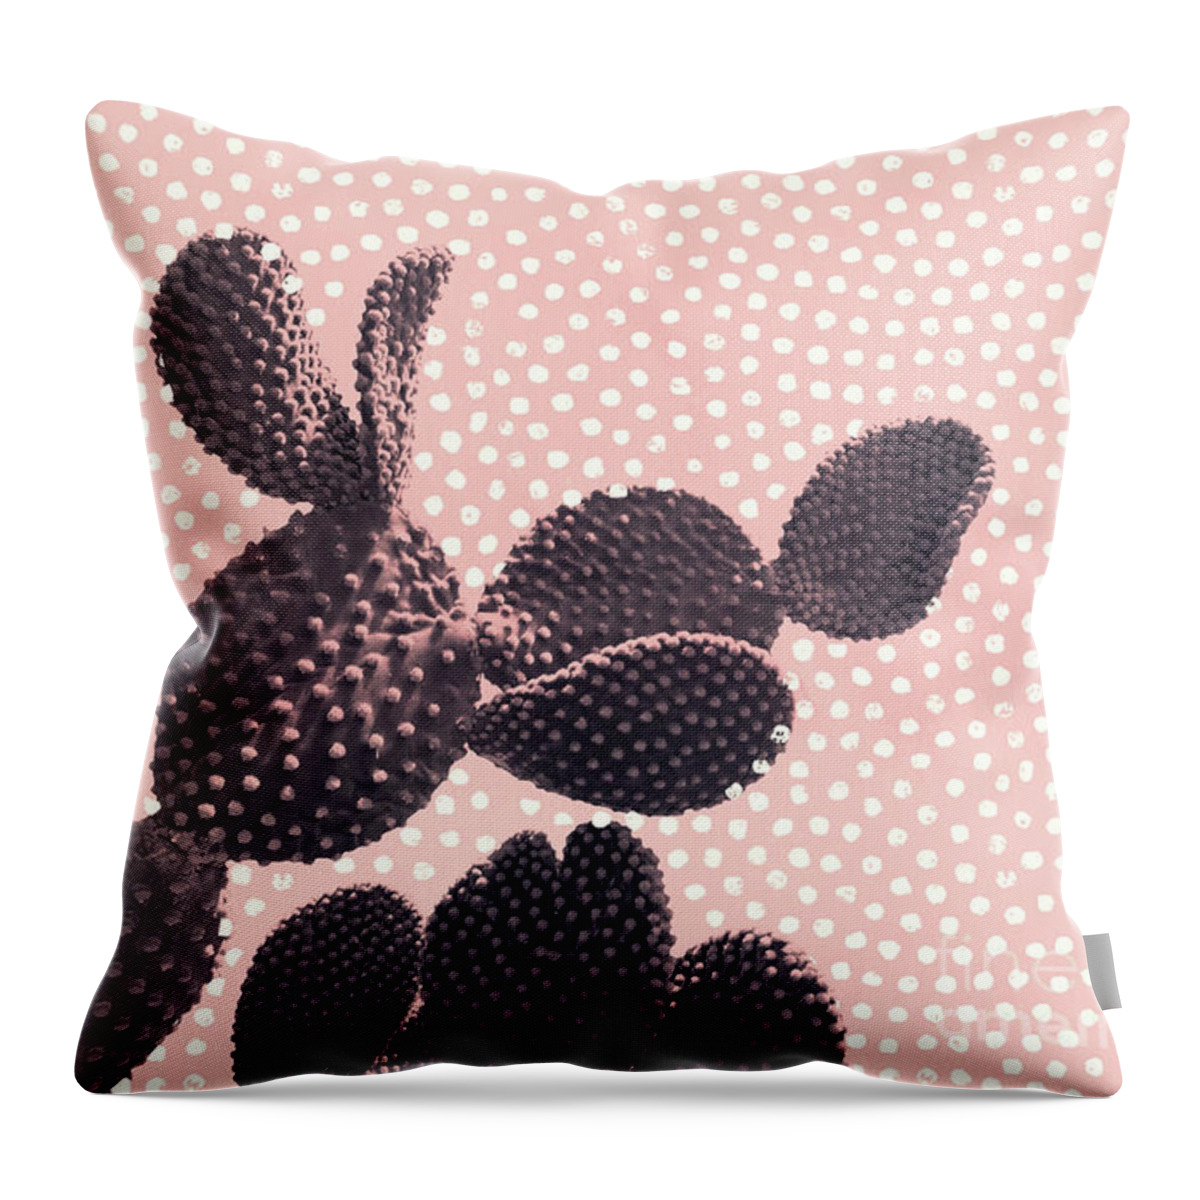 Cactus Throw Pillow featuring the mixed media Cactus with Polka Dots by Emanuela Carratoni